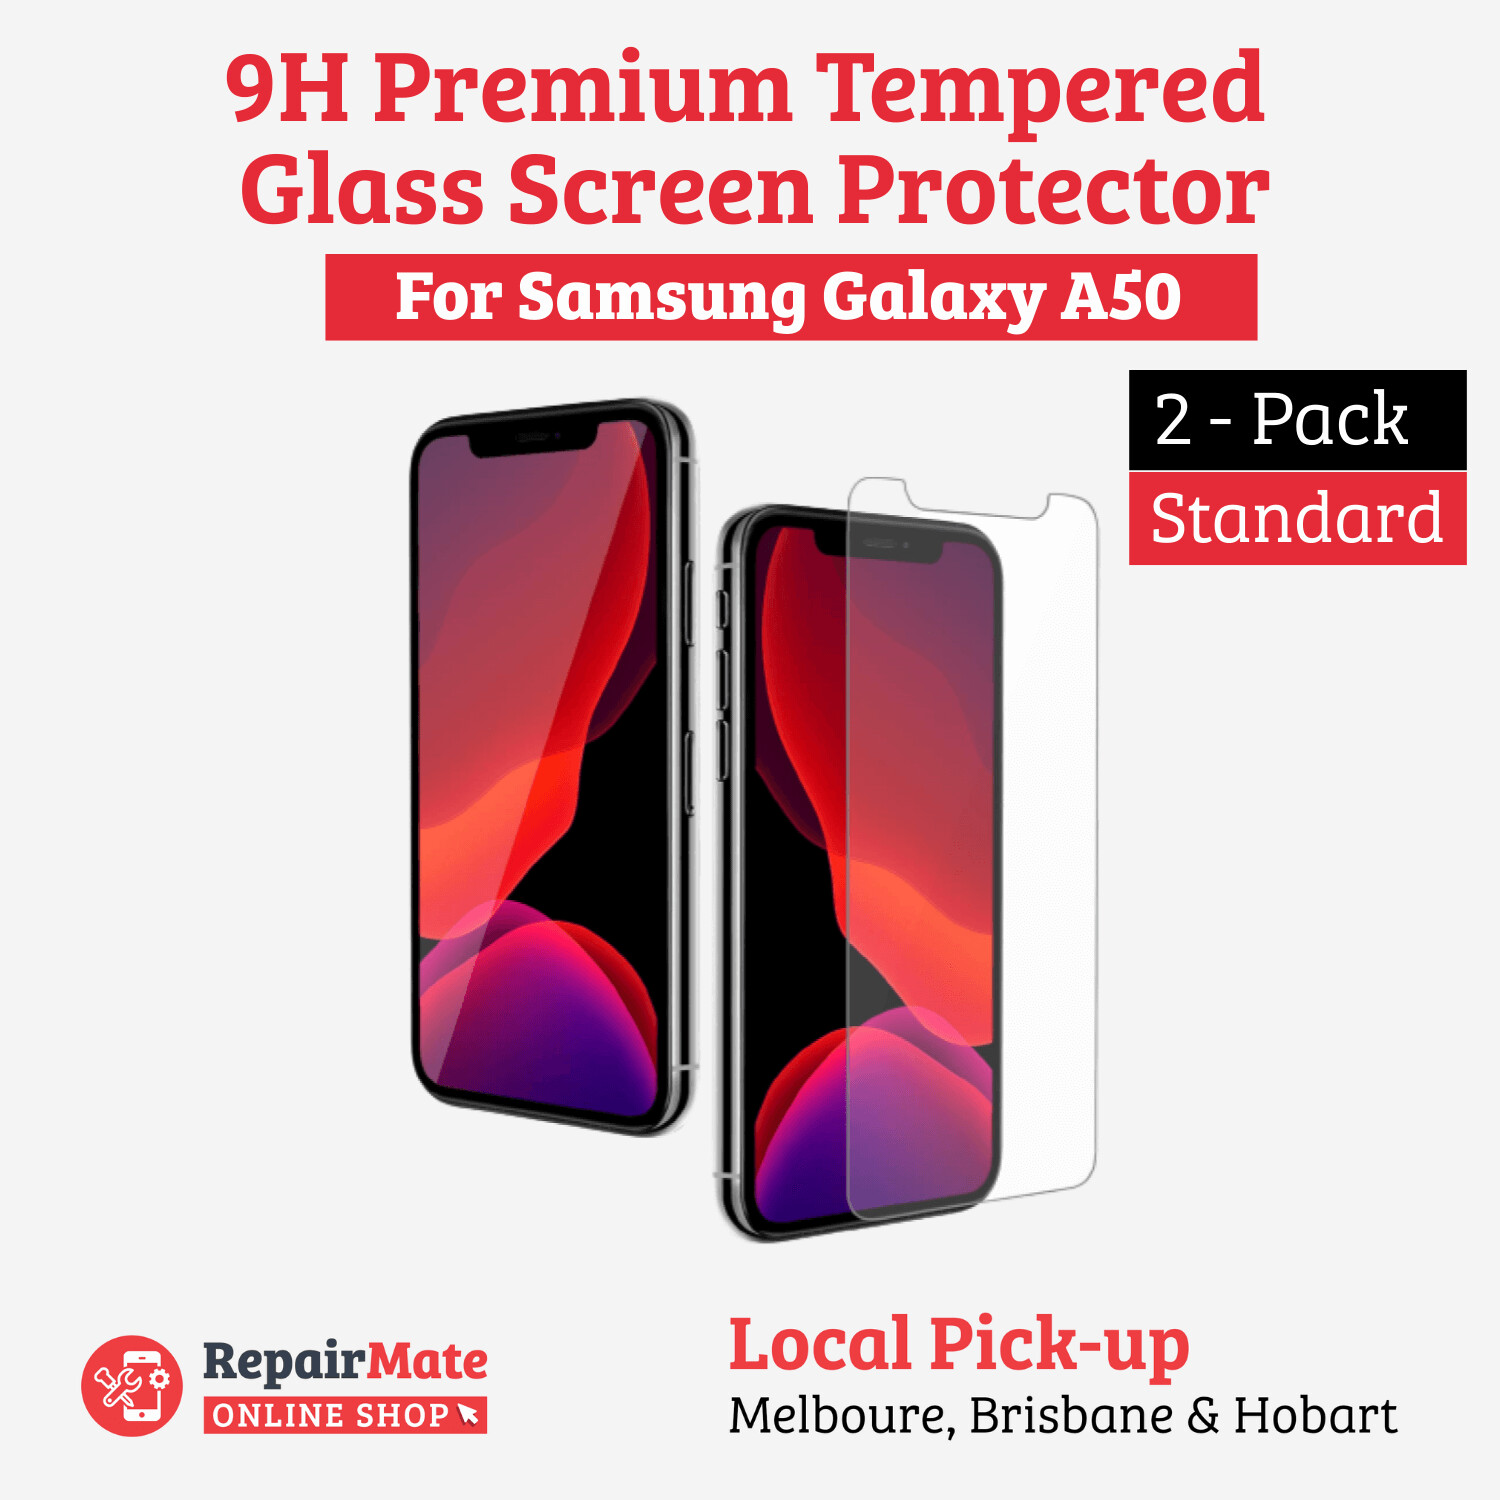 Samsung Galaxy A50 9H Premium Tempered Glass Screen Protector [2 Pack]